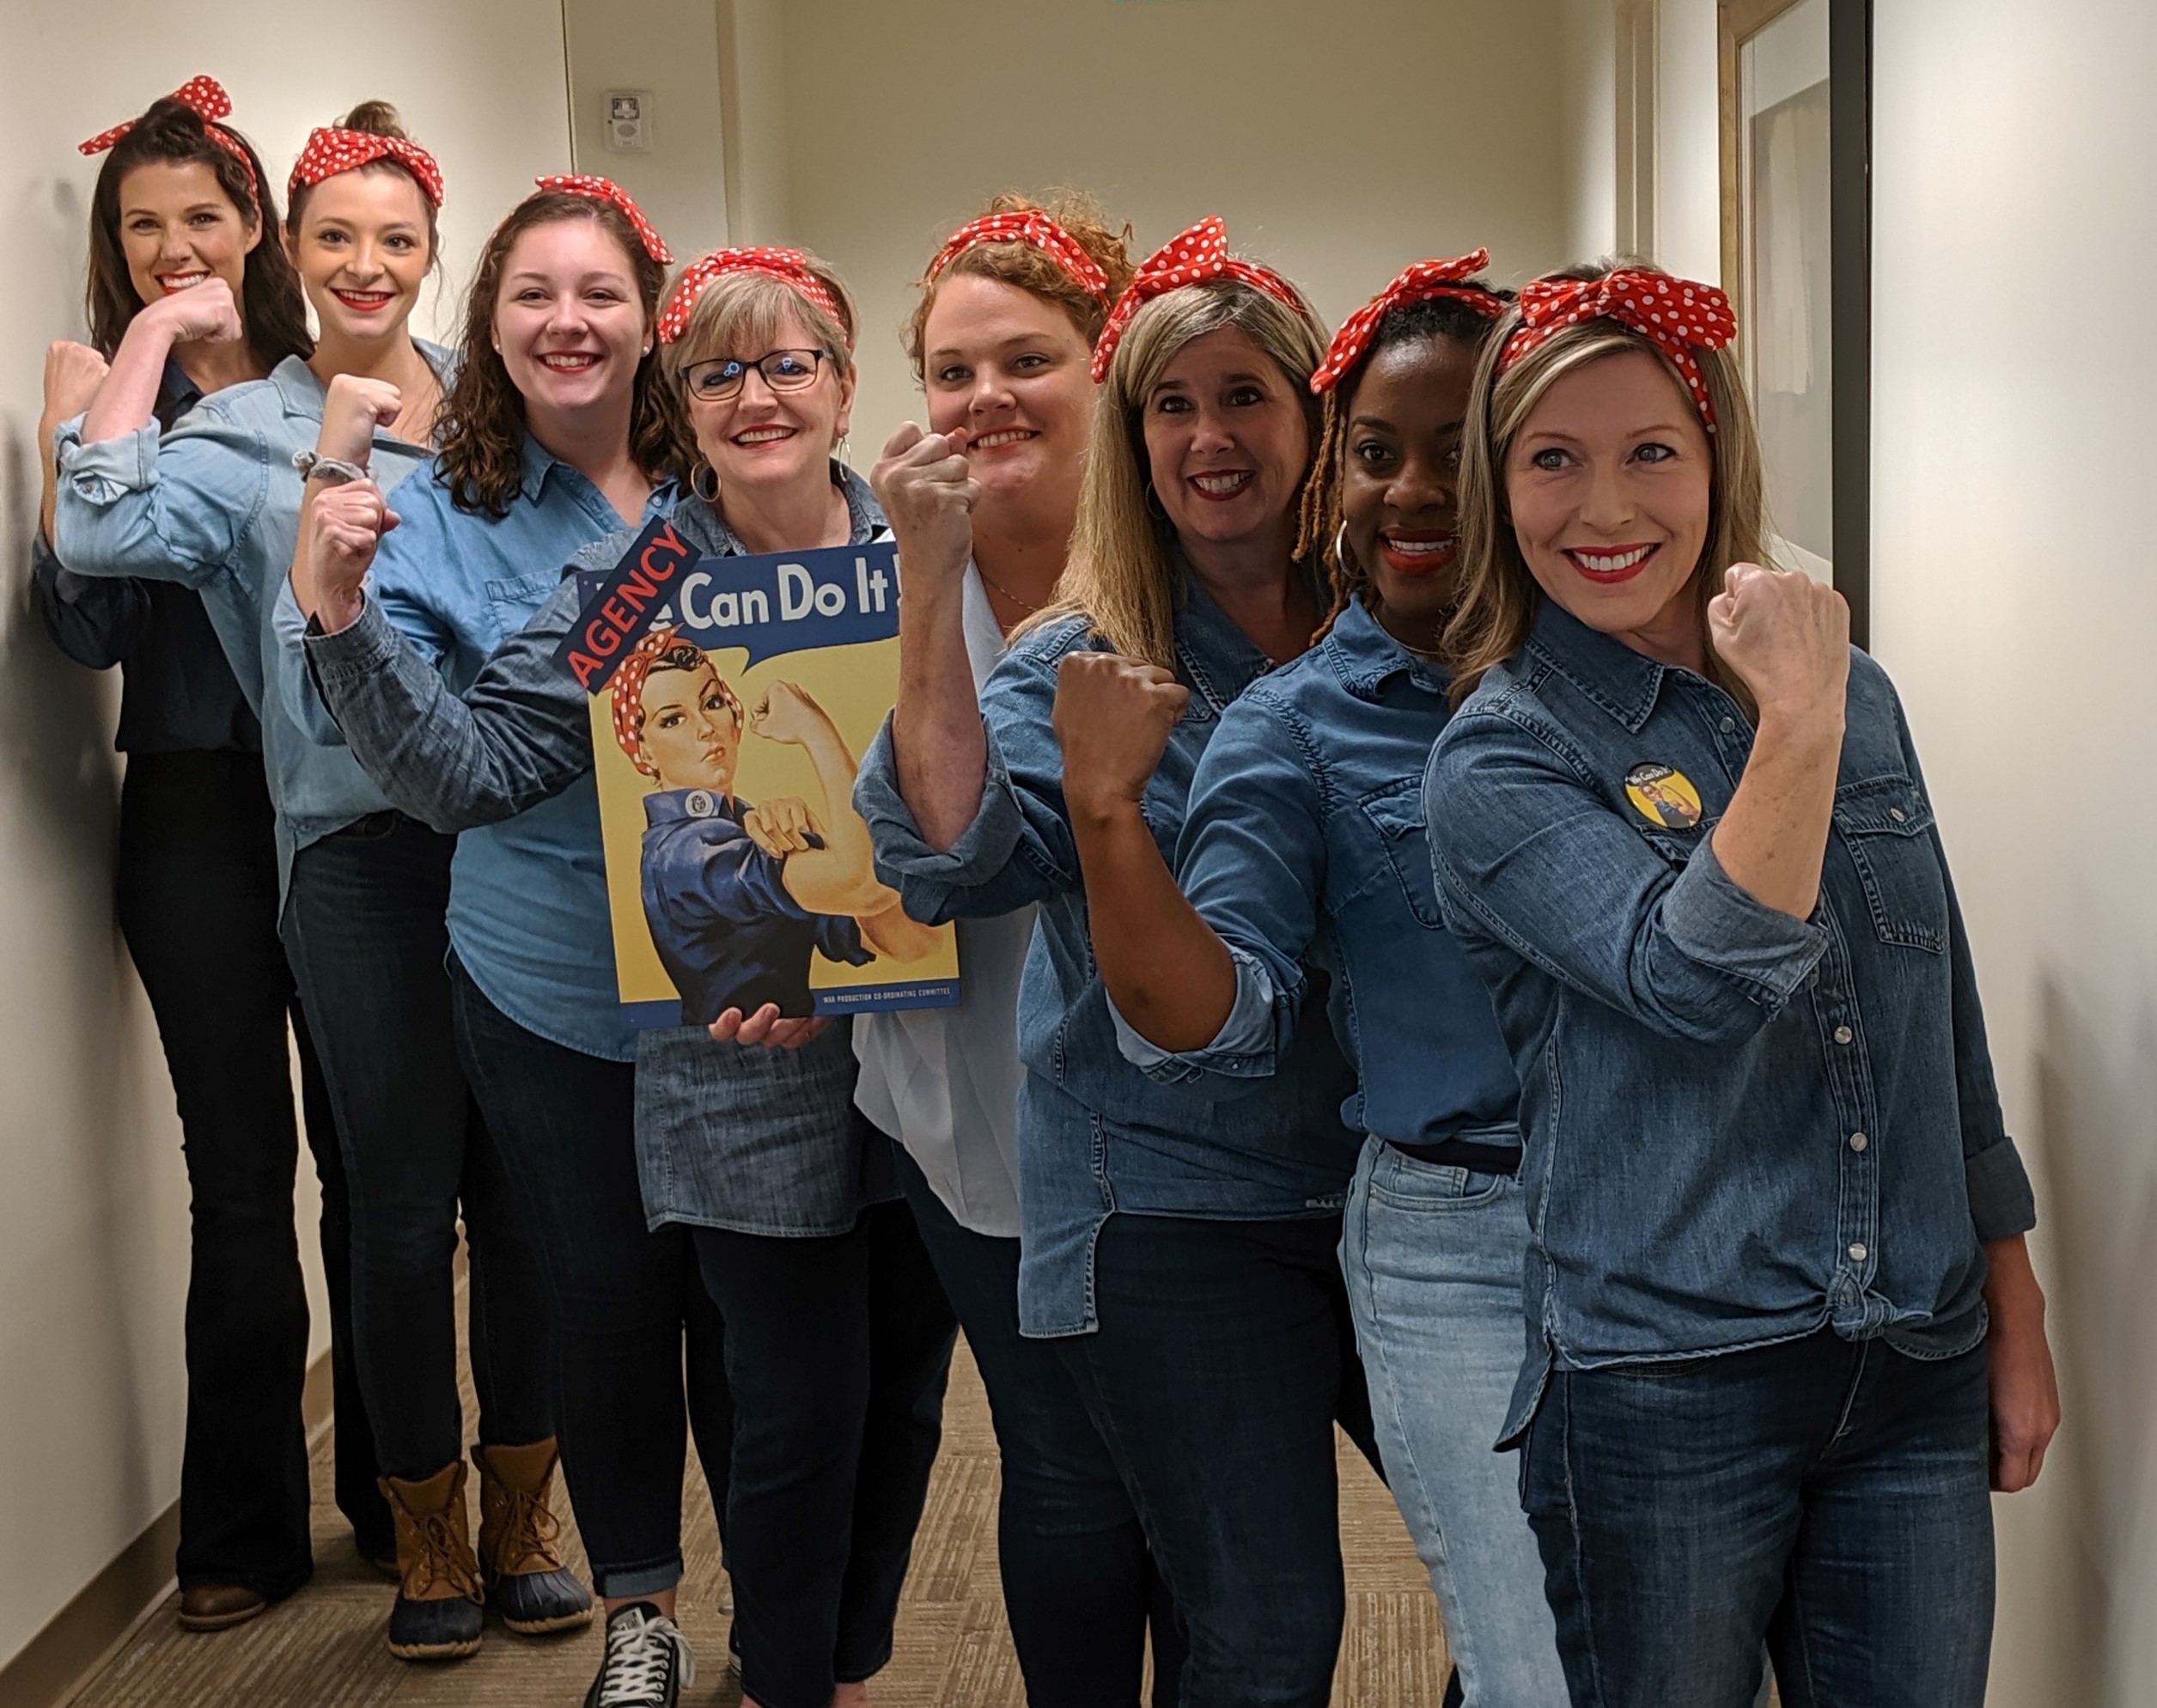 Agency staff of Birmingham, AL patriated in an annual costume contest fundraiser benefiting the United Way of Central Alabama.